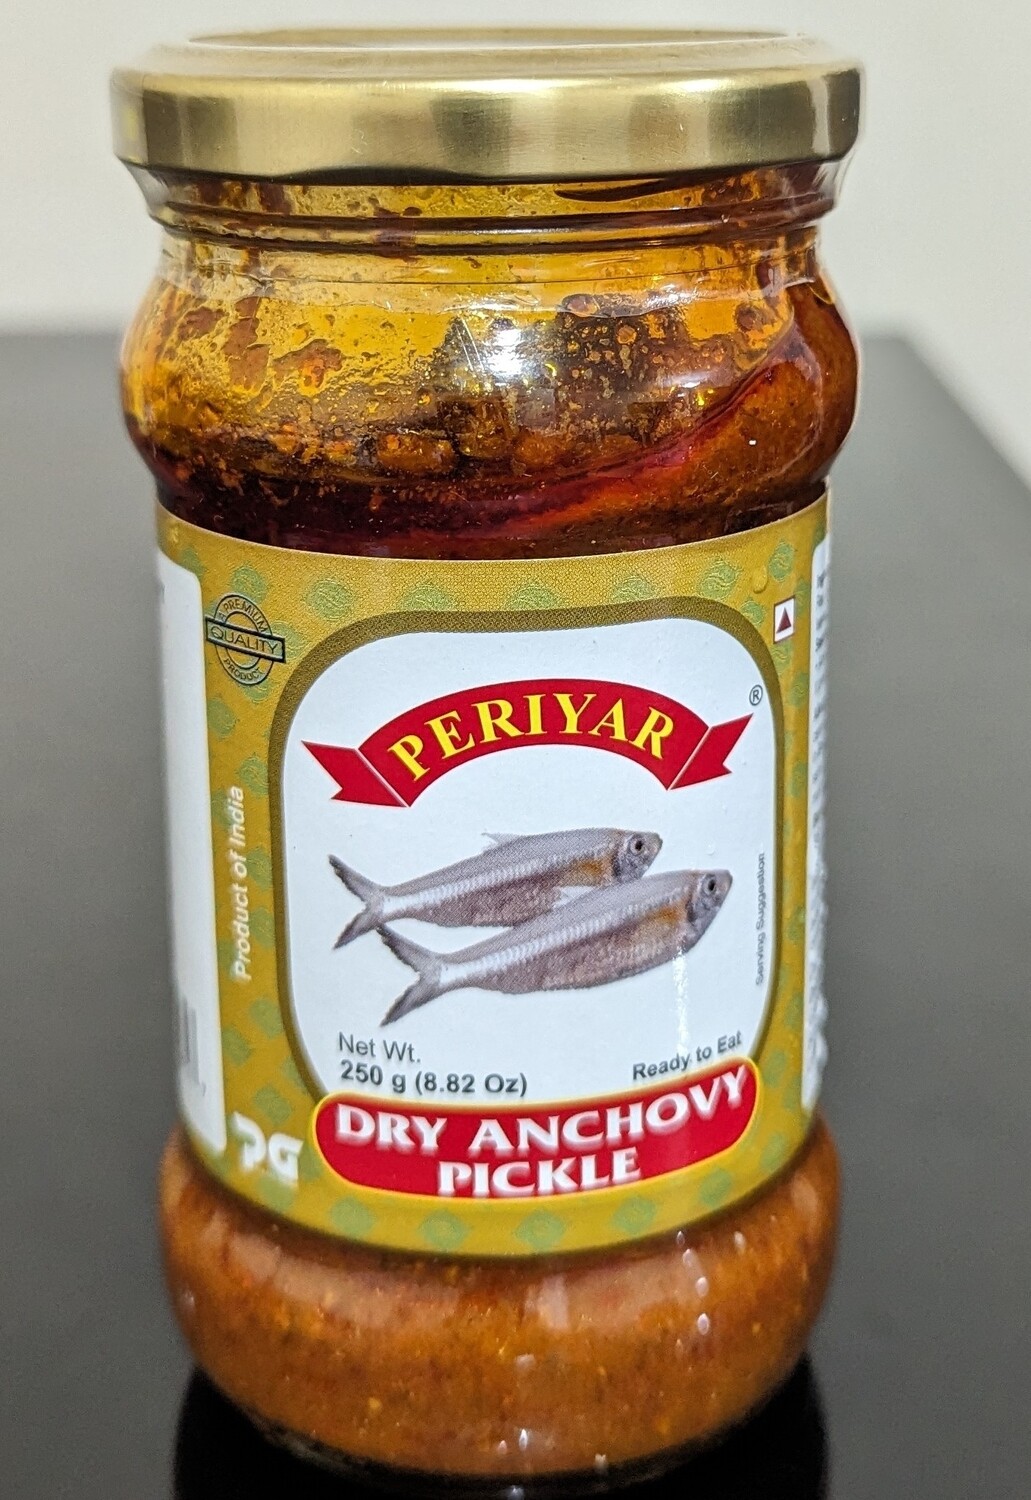 Dry Anchovy pickle